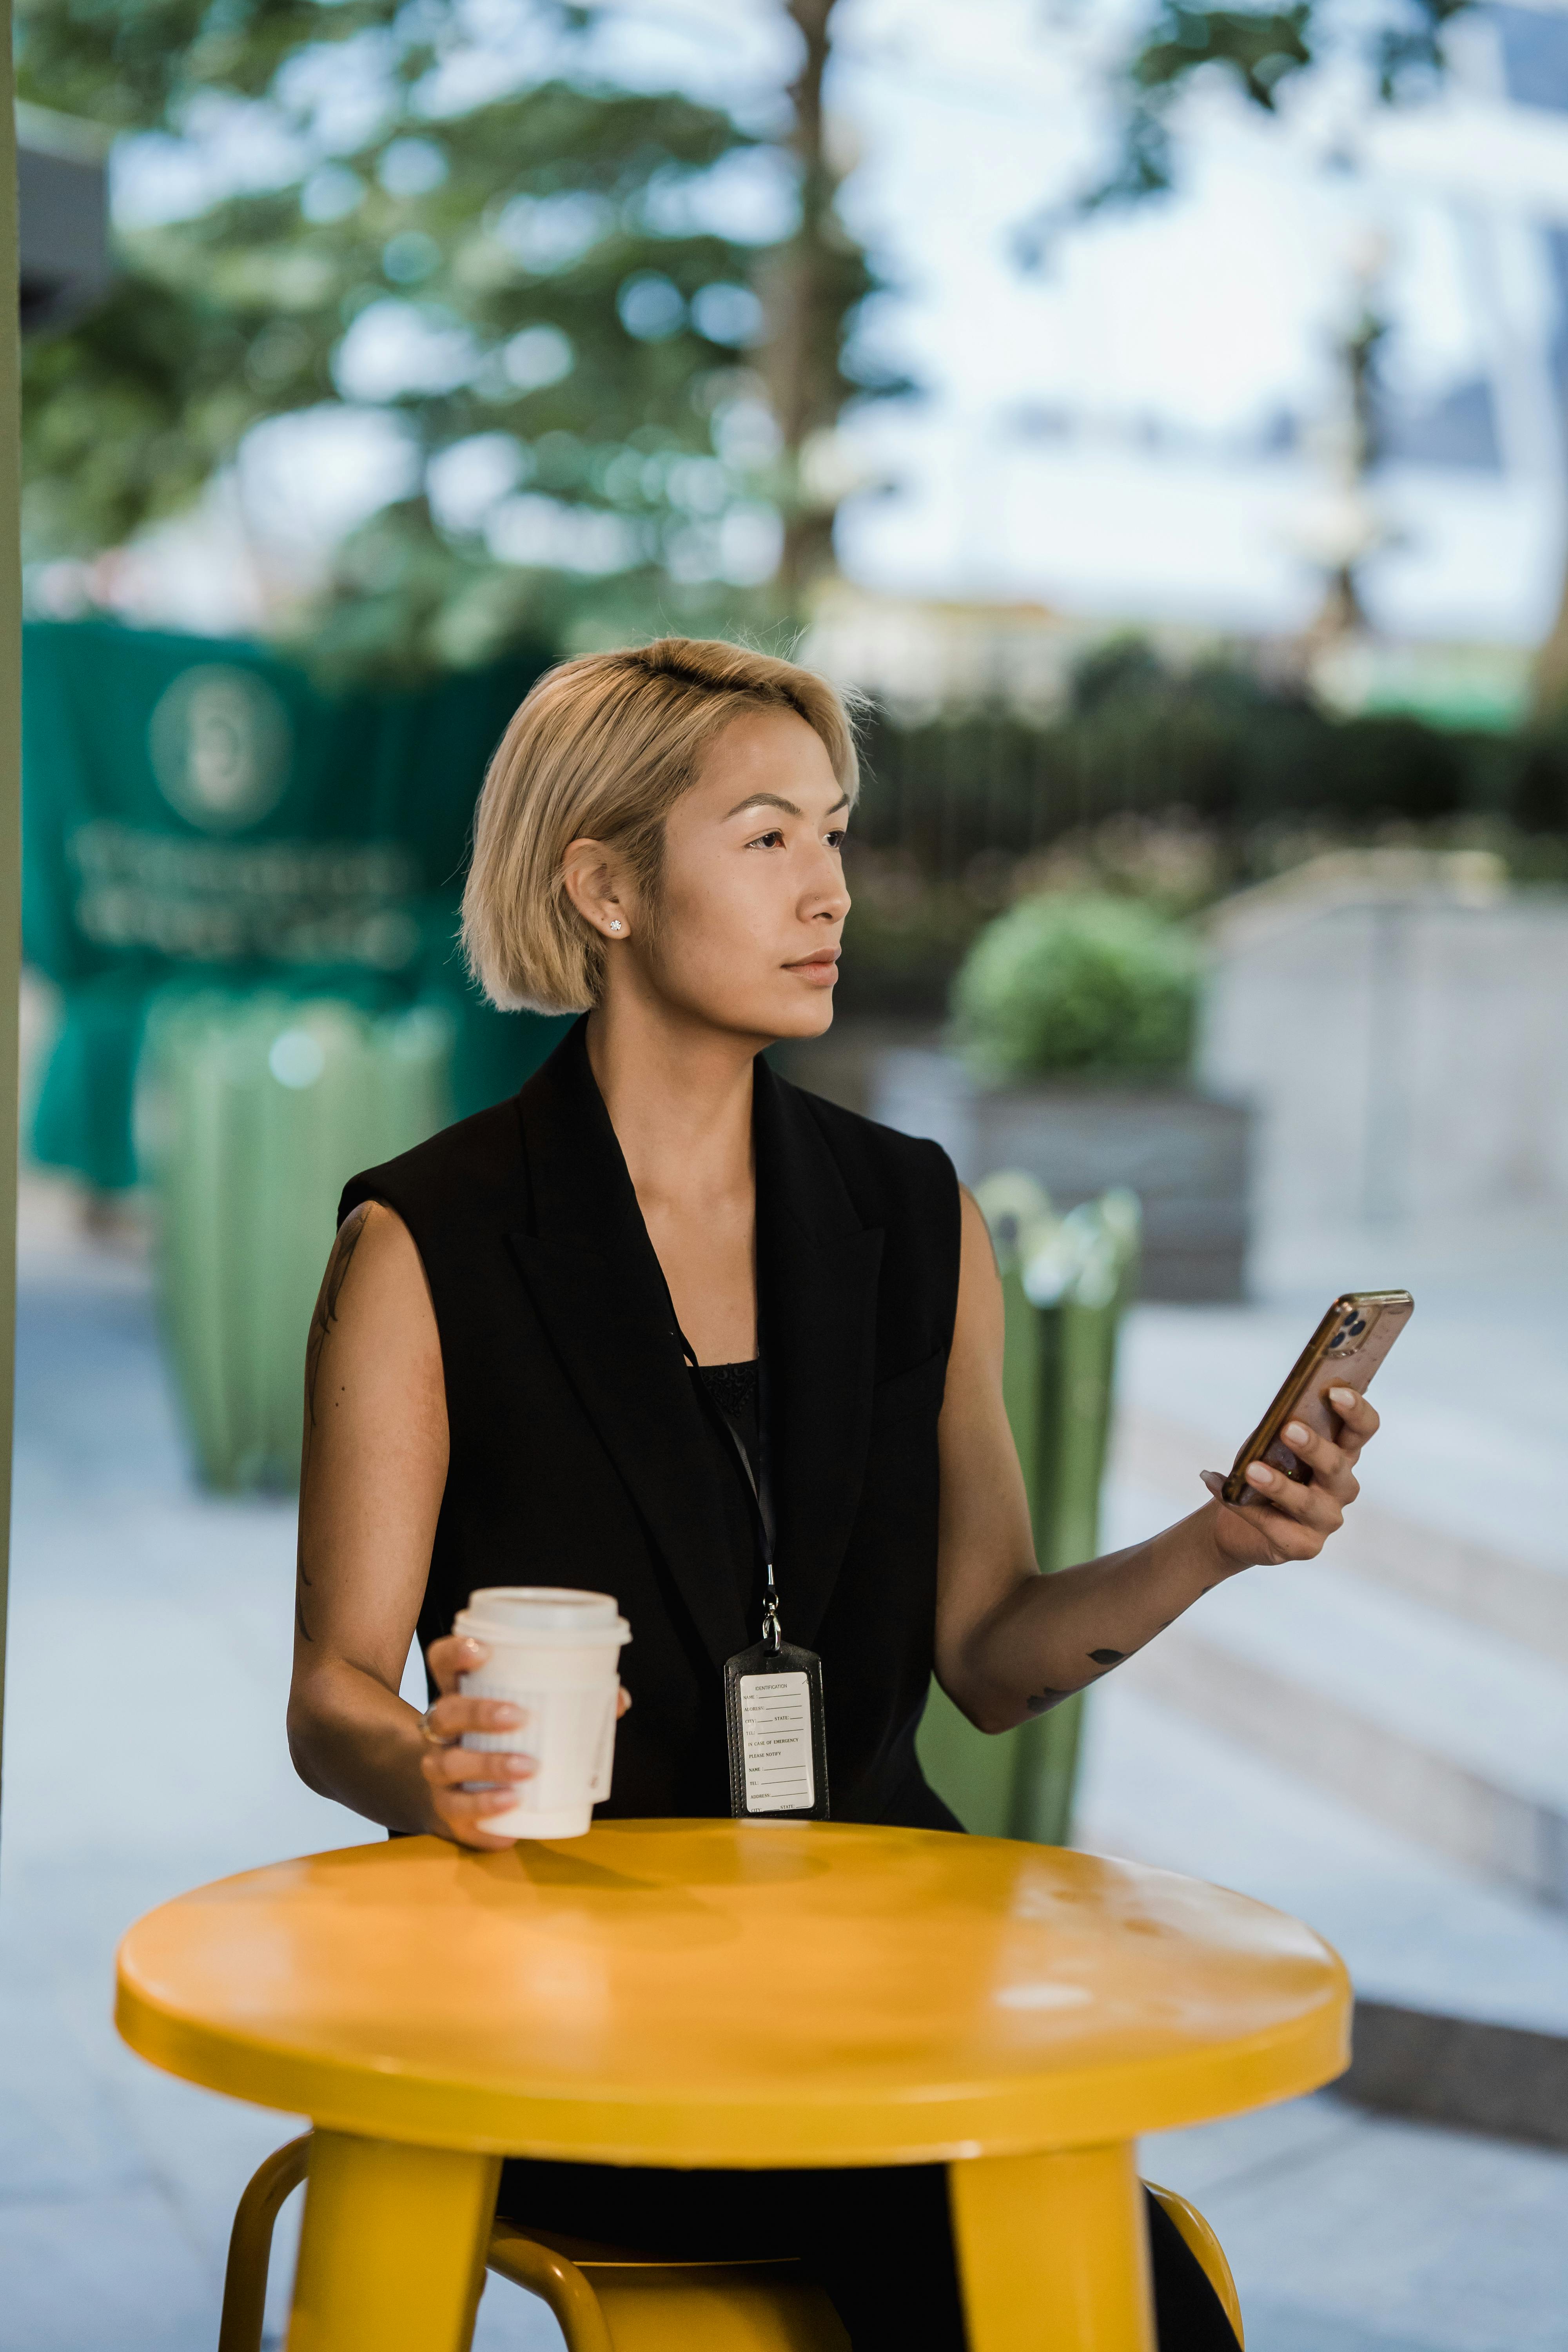 woman with an identification badge sitting behind a table and holding a phone and a coffee cup